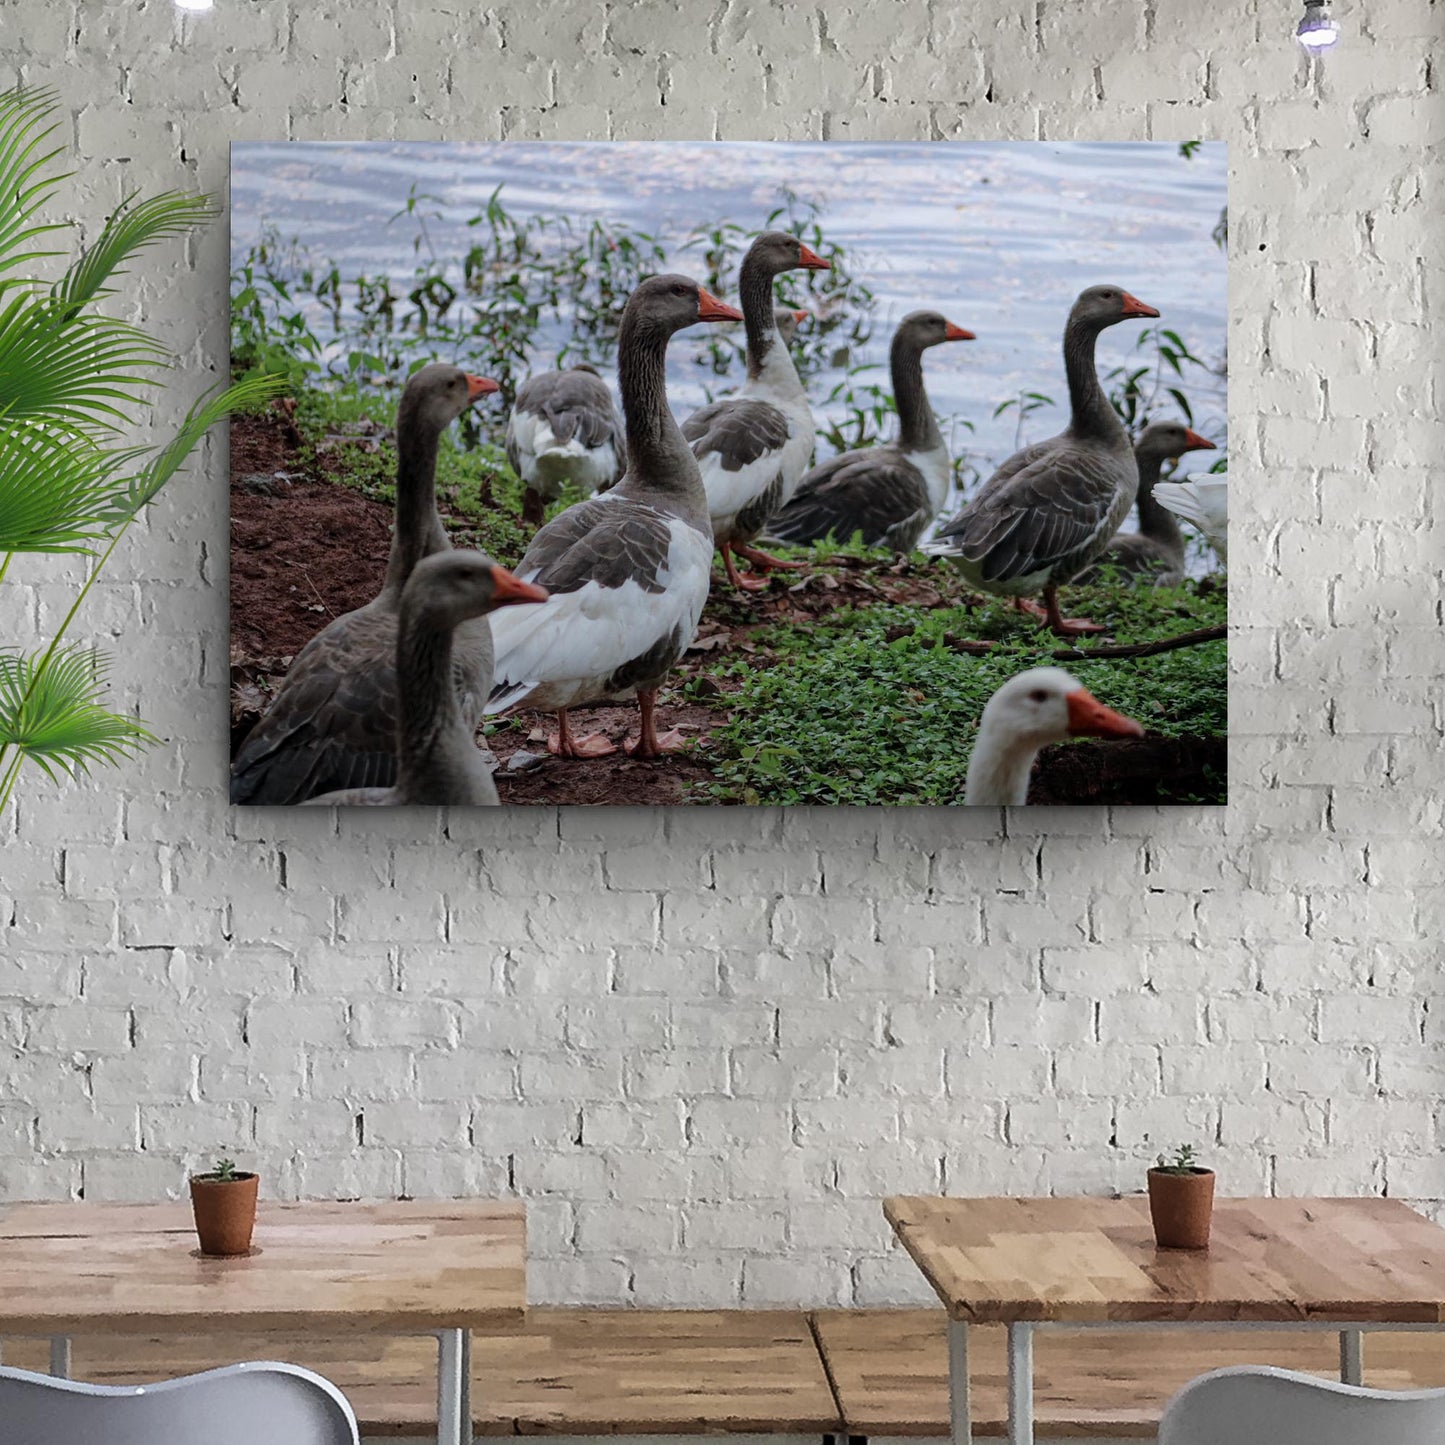 Flock Of Domestic Geese Canvas Wall Art Style 2 - Image by Tailored Canvases